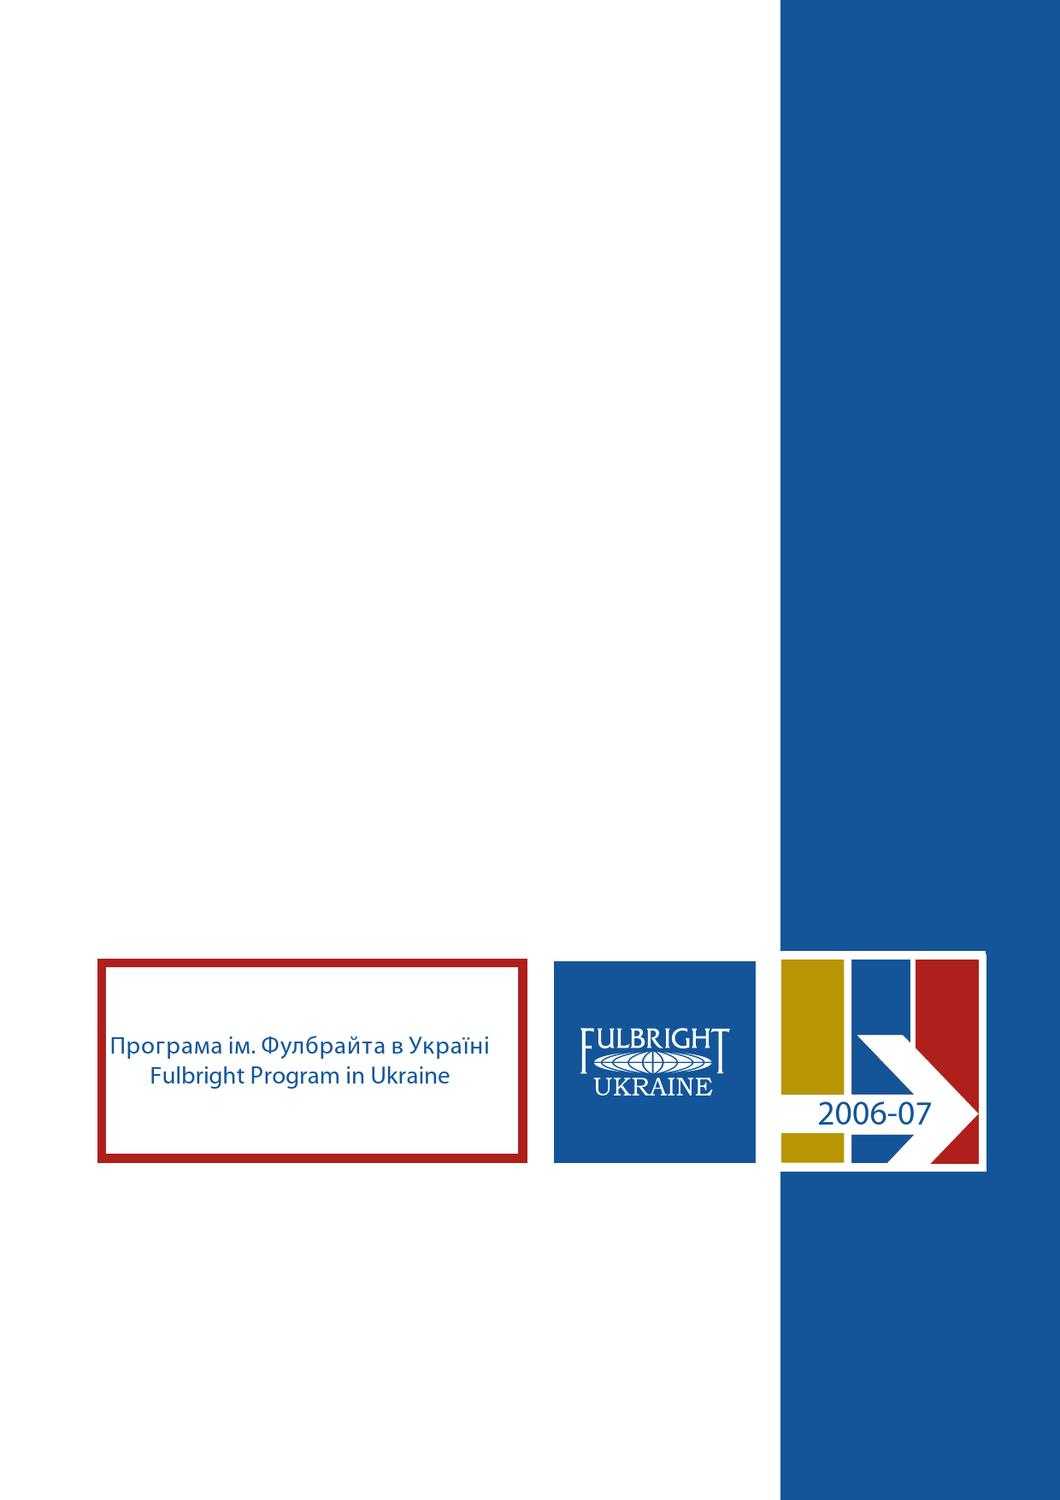 Fulbright Ukraine Yearbook 2006 2007The Fulbright Pertaining To College Ruled Lined Paper Template Word 2007